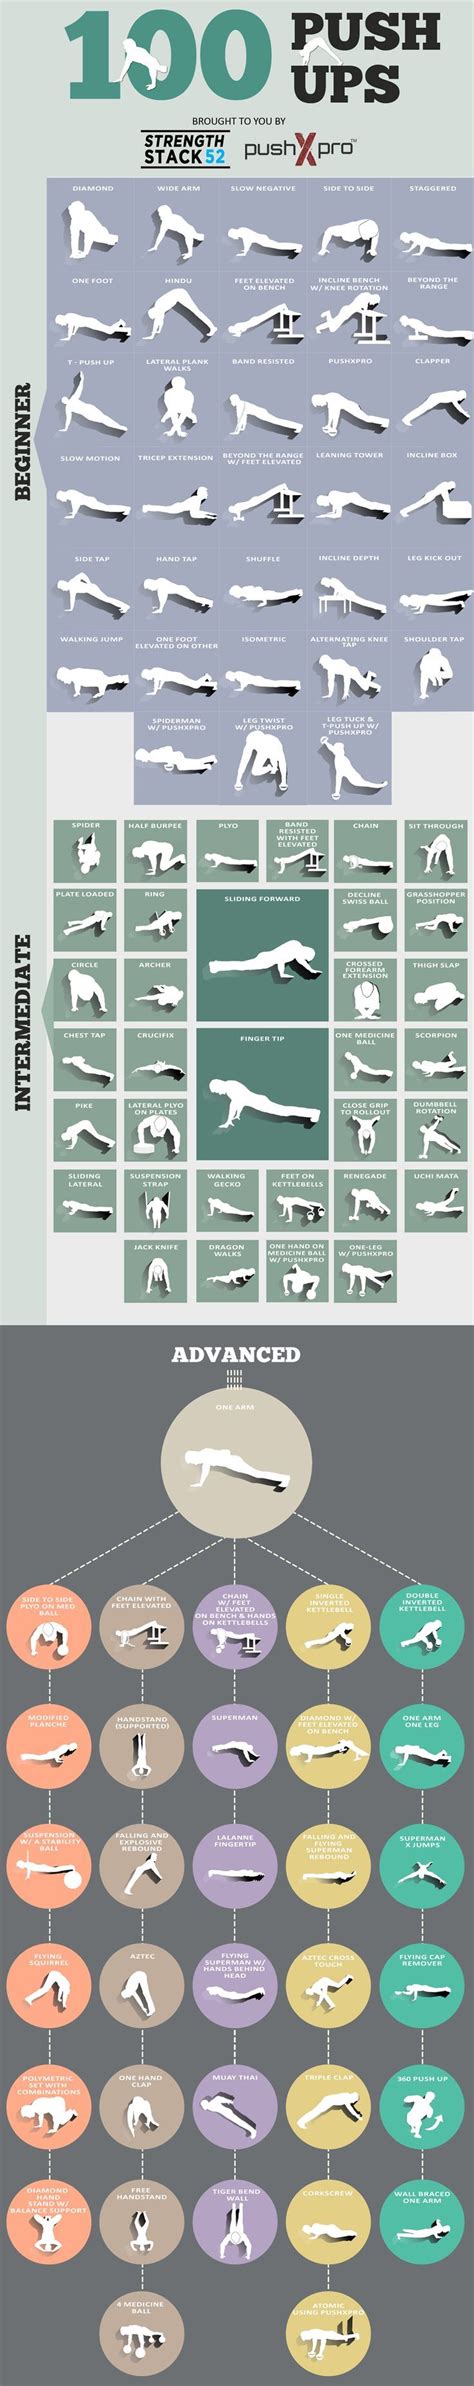 100 Push Up Variations With How To Videos Stack 52 With Images